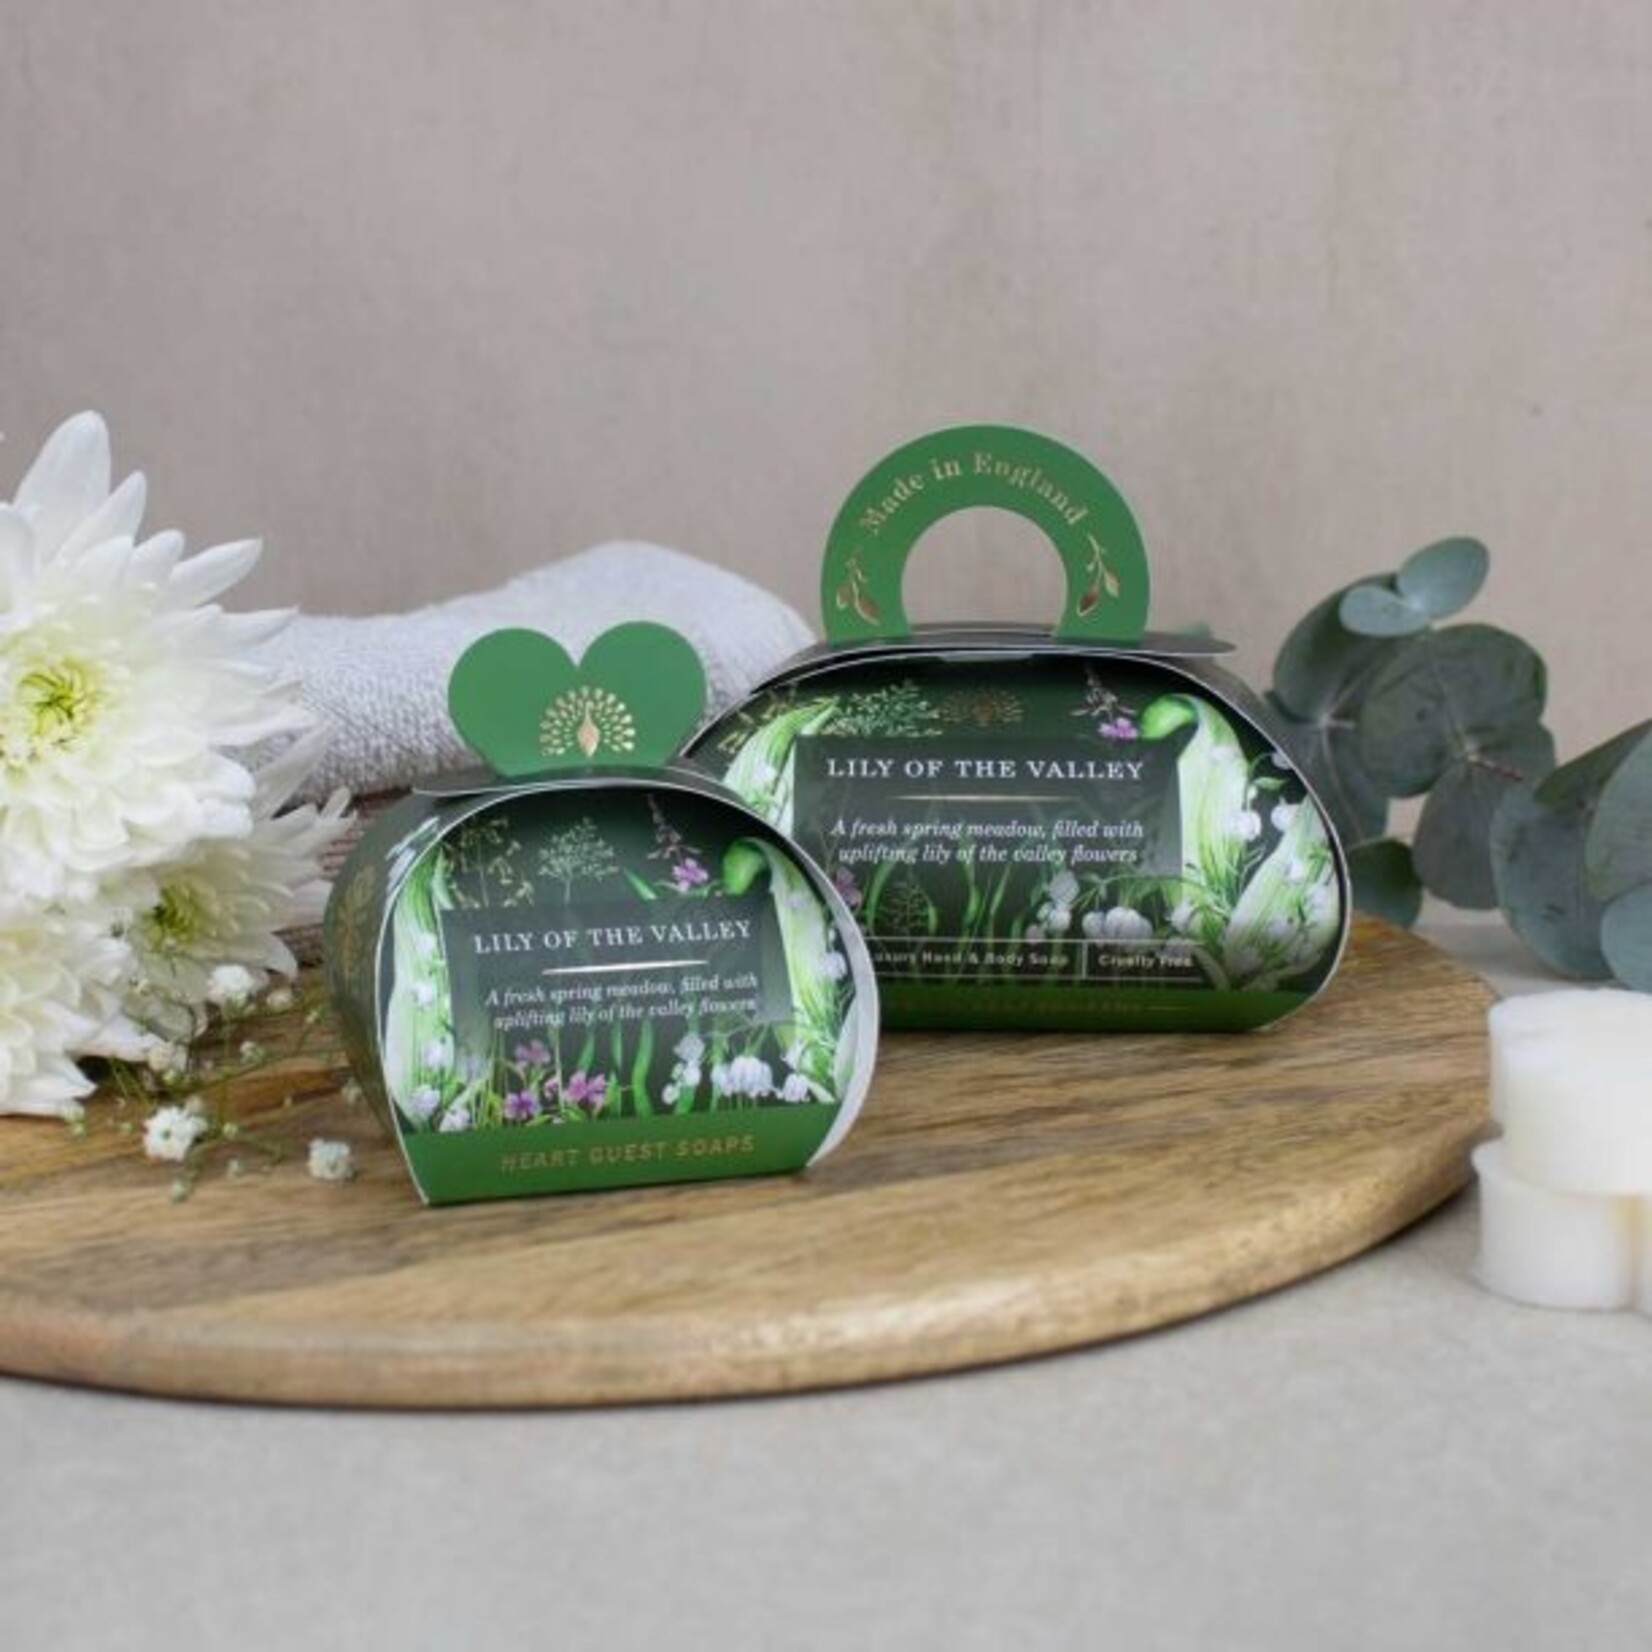 The English Soap Company Luxury Soap - Lily of the Valley